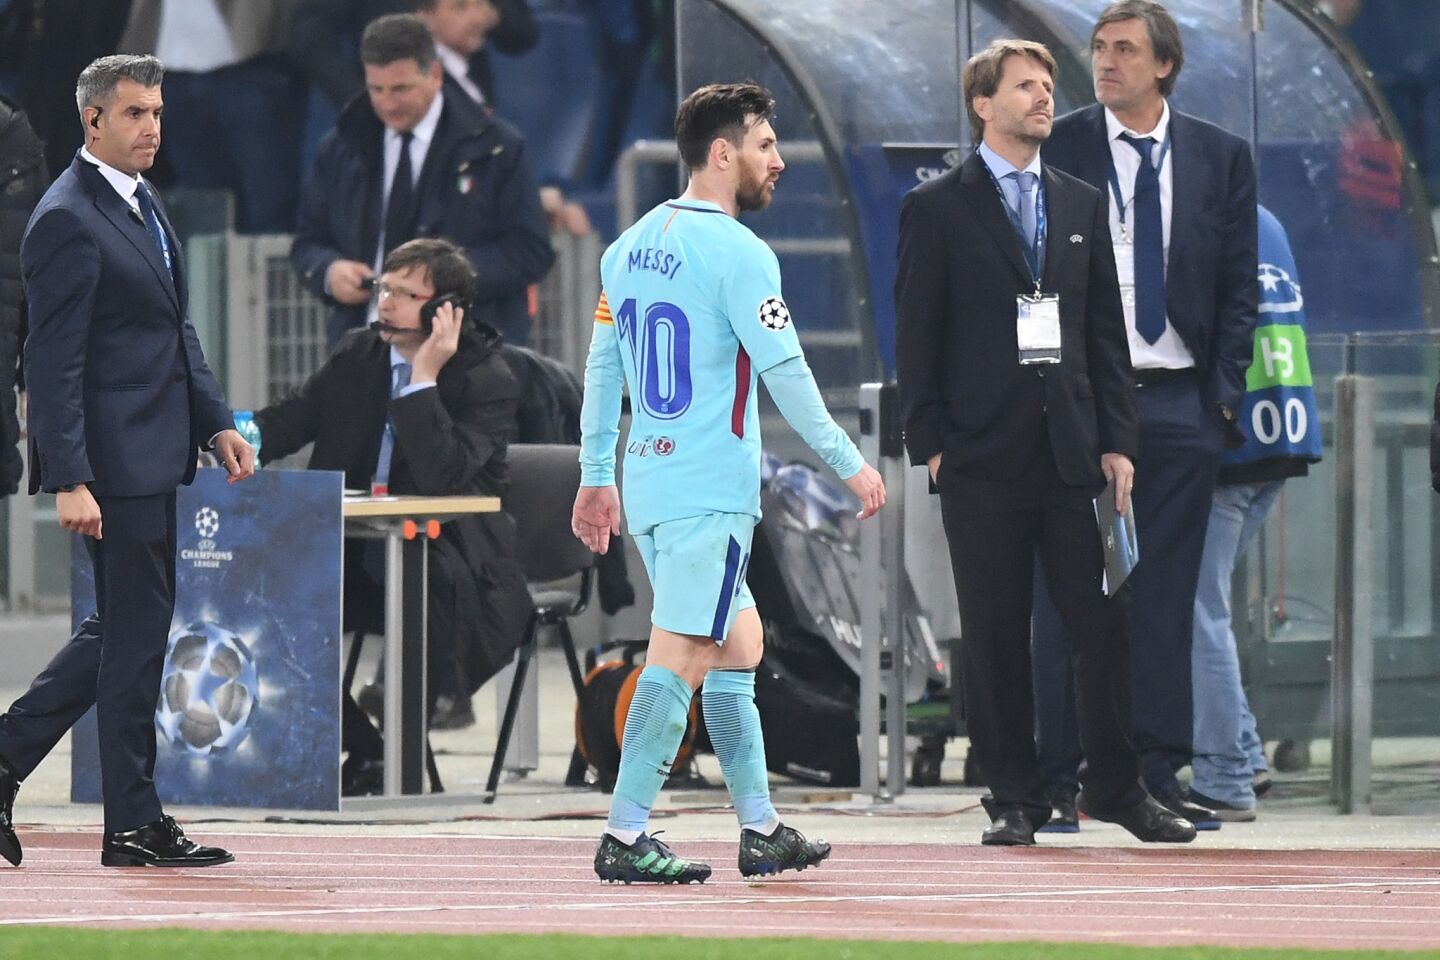 ROME, ITALY - APRIL 10: Lionel Messi of Barcelona walks off the pitch after the UEFA Champions League Quarter Final Second Leg match between AS Roma and FC Barcelona at Stadio Olimpico on April 10, 2018 in Rome, Italy.